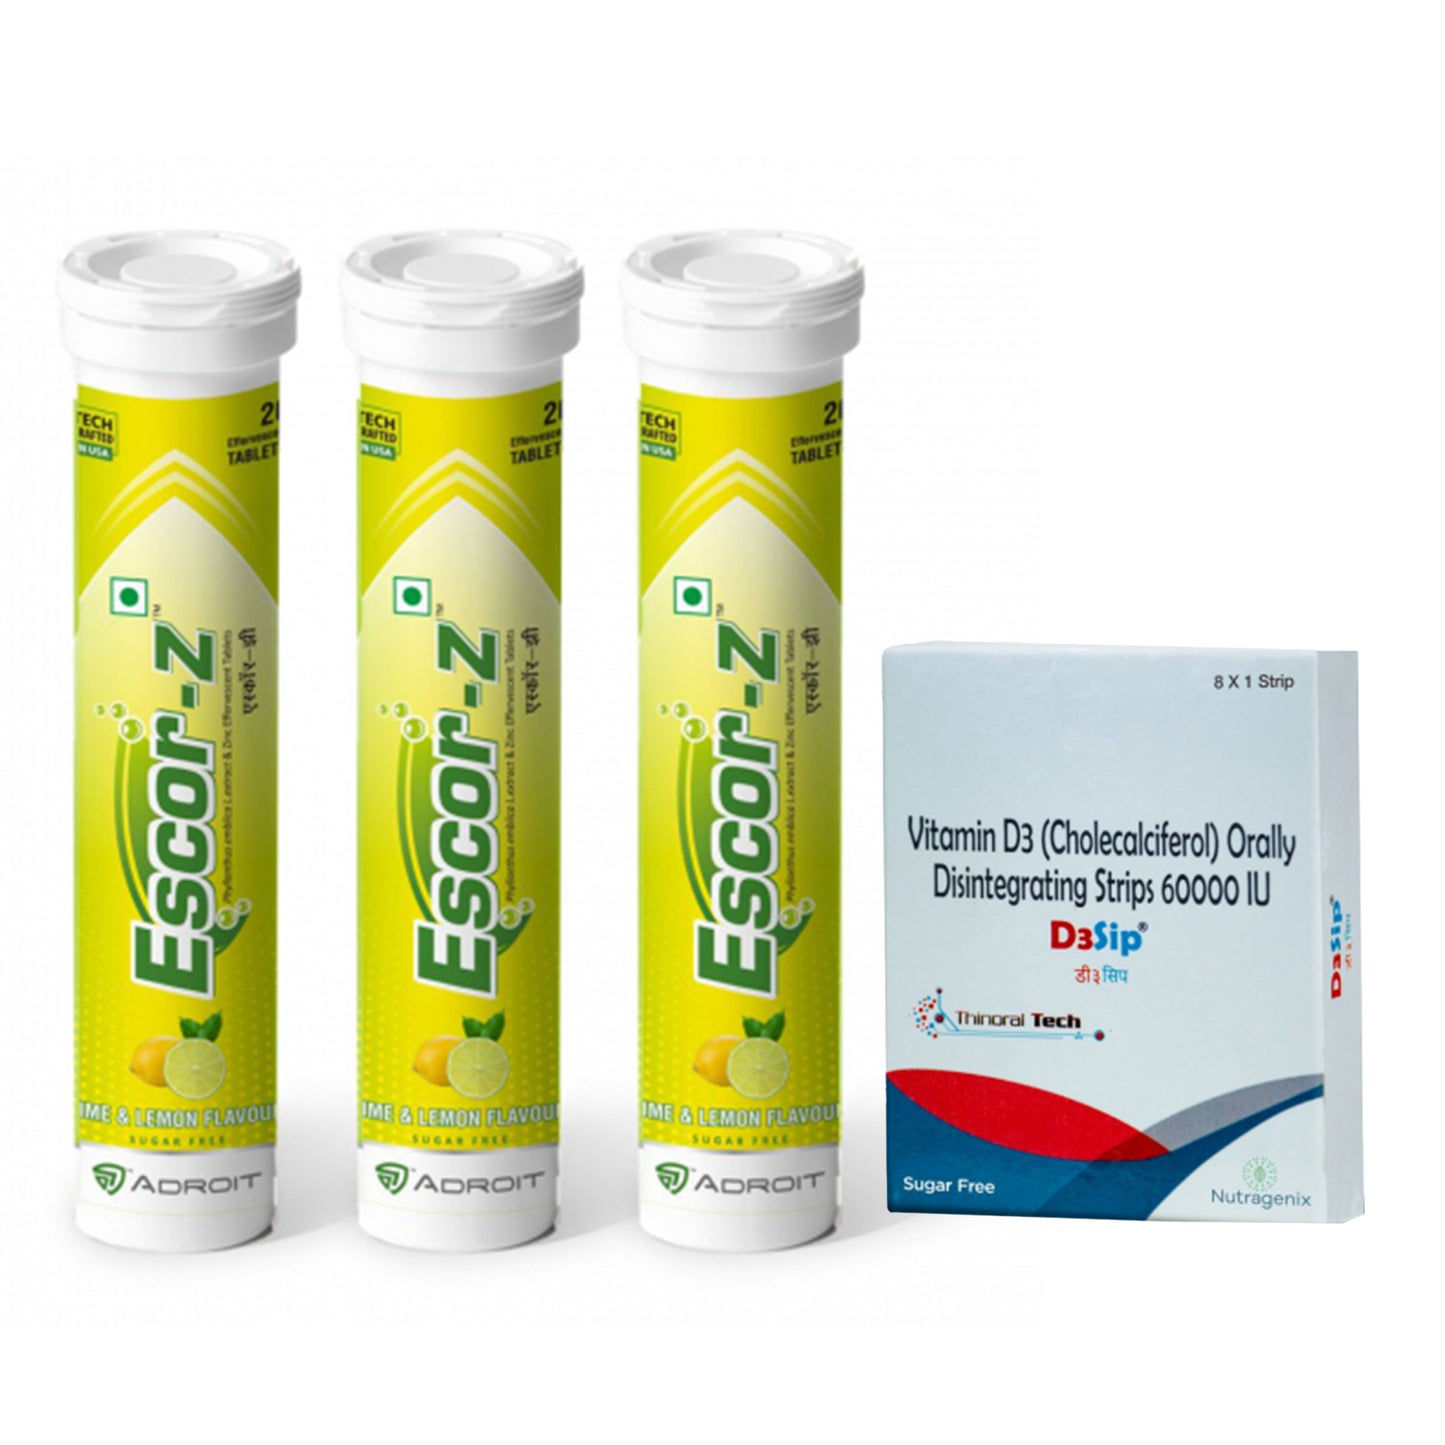 Escor-Z Effervescent Tablets Lime and Lemon, 60s with D3sip, 8 Orally Dissolving Films